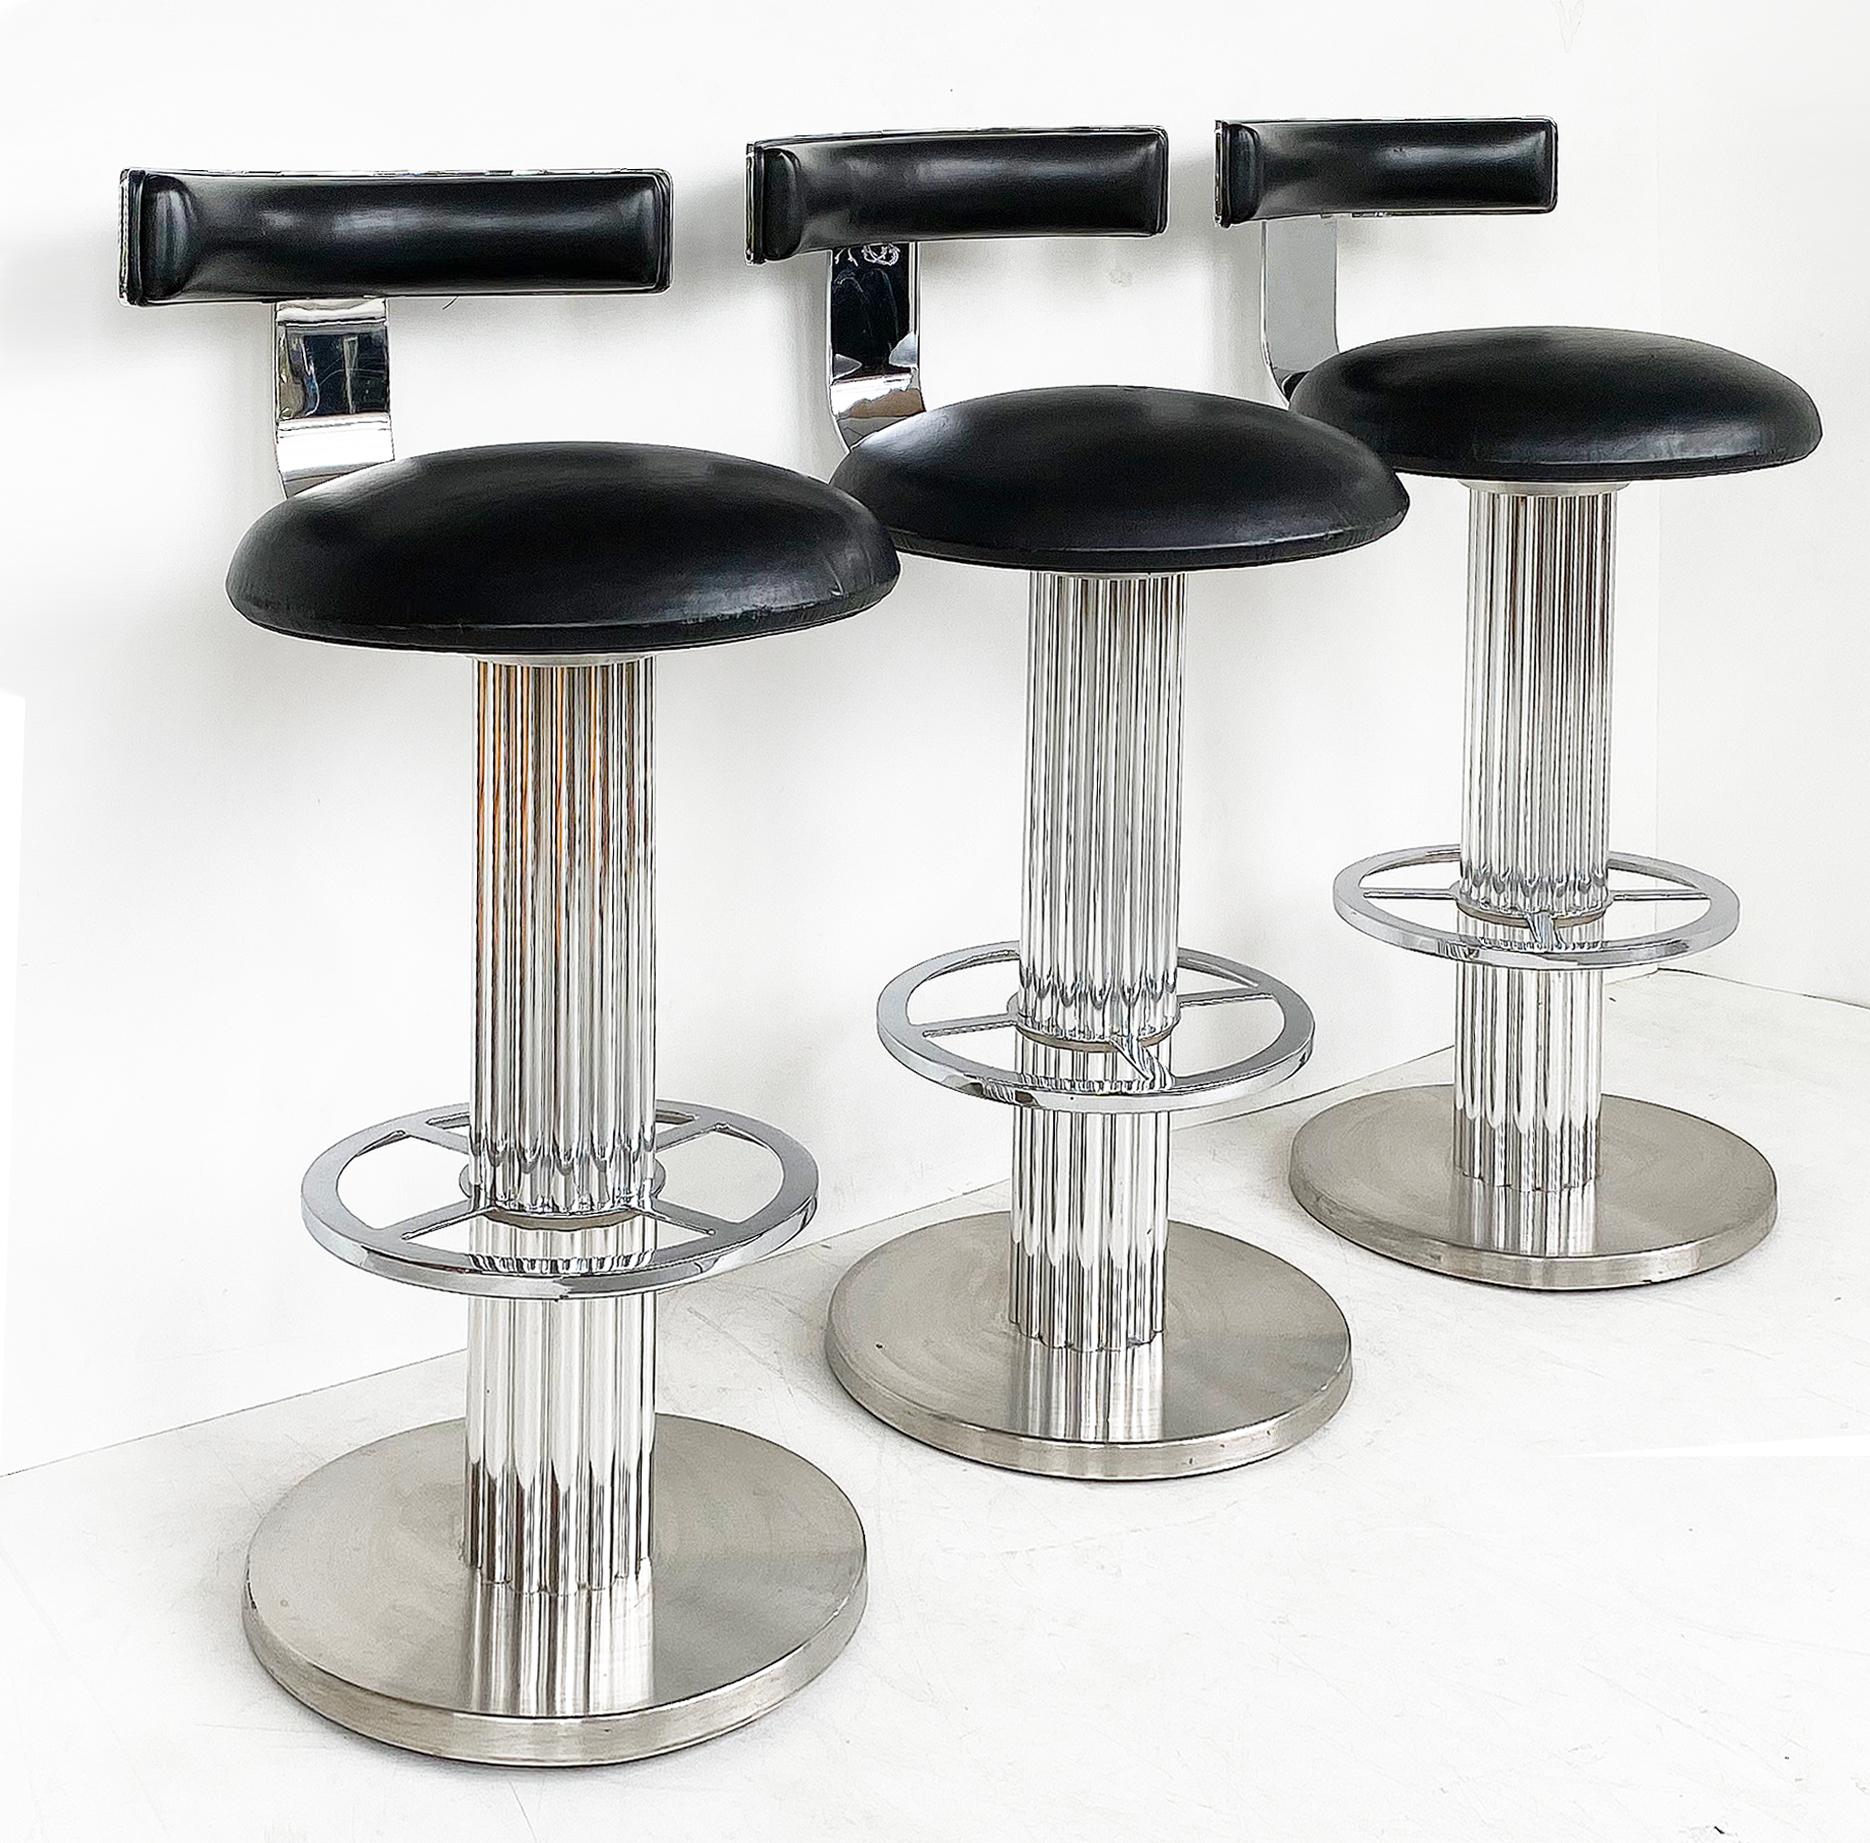 Design for Leisure Swivel bar stools with chrome, nickeled steel, black leather

Offered is a set of three Design for Leisure swivel bar stools. These high-quality, heavy and substantial stools are constructed with chrome and nickel-plated steel.